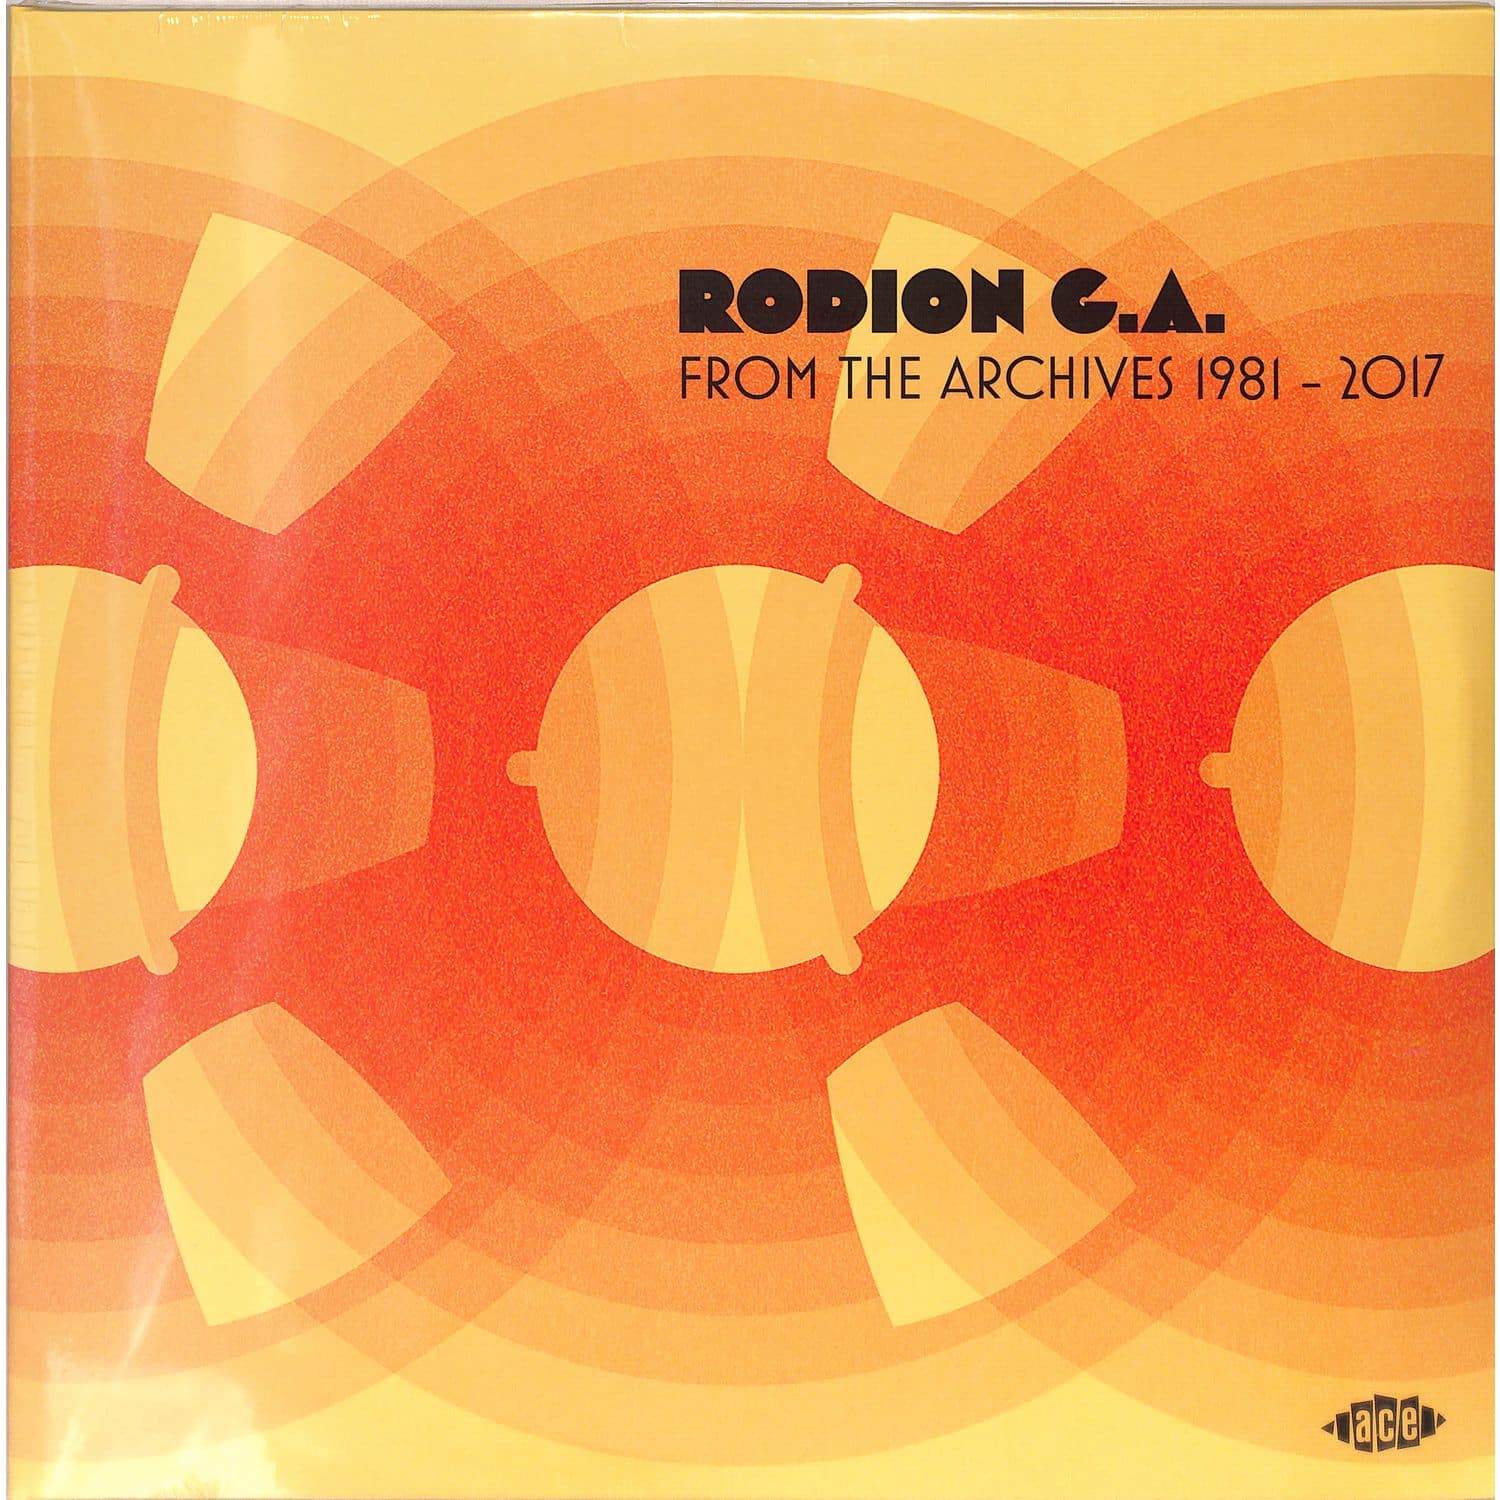 Rodion G.A. - FROM THE ARCHIVES 1981-2017 